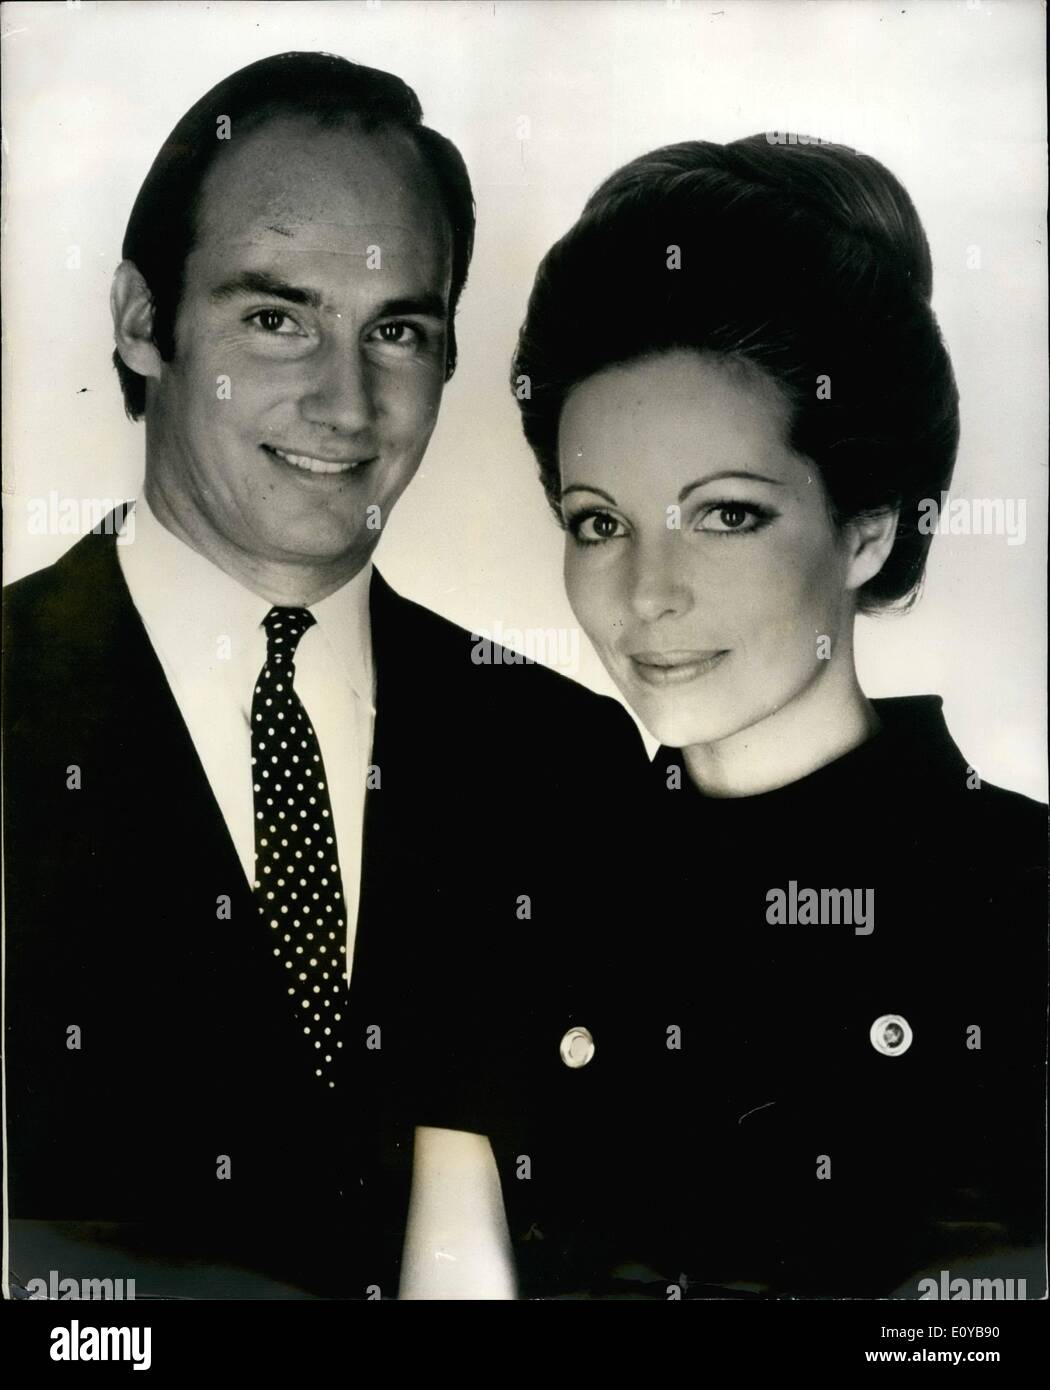 Oct. 10, 1969 - The Bride Of The Aga Khan: The Aga Khan 32-year-old Leader of 20 million Ismaili Moslemo, is to marry Lady James Crichton-Stuart, 29, who modeled under the name of Sarah Stuart in London. The wedding will probably take place in Paris of Geneva at the end of the month, she will then be known as Begun Aga Khan, she has become a Moslemo Until their marriage was dissolved in December 1967, she was the wife of Lord Jame Crichton-Stuart 33, brother of the Marquess of Bute. They had no children. In June this year she gave up her job as a 4,000-a-year fashion model Stock Photo